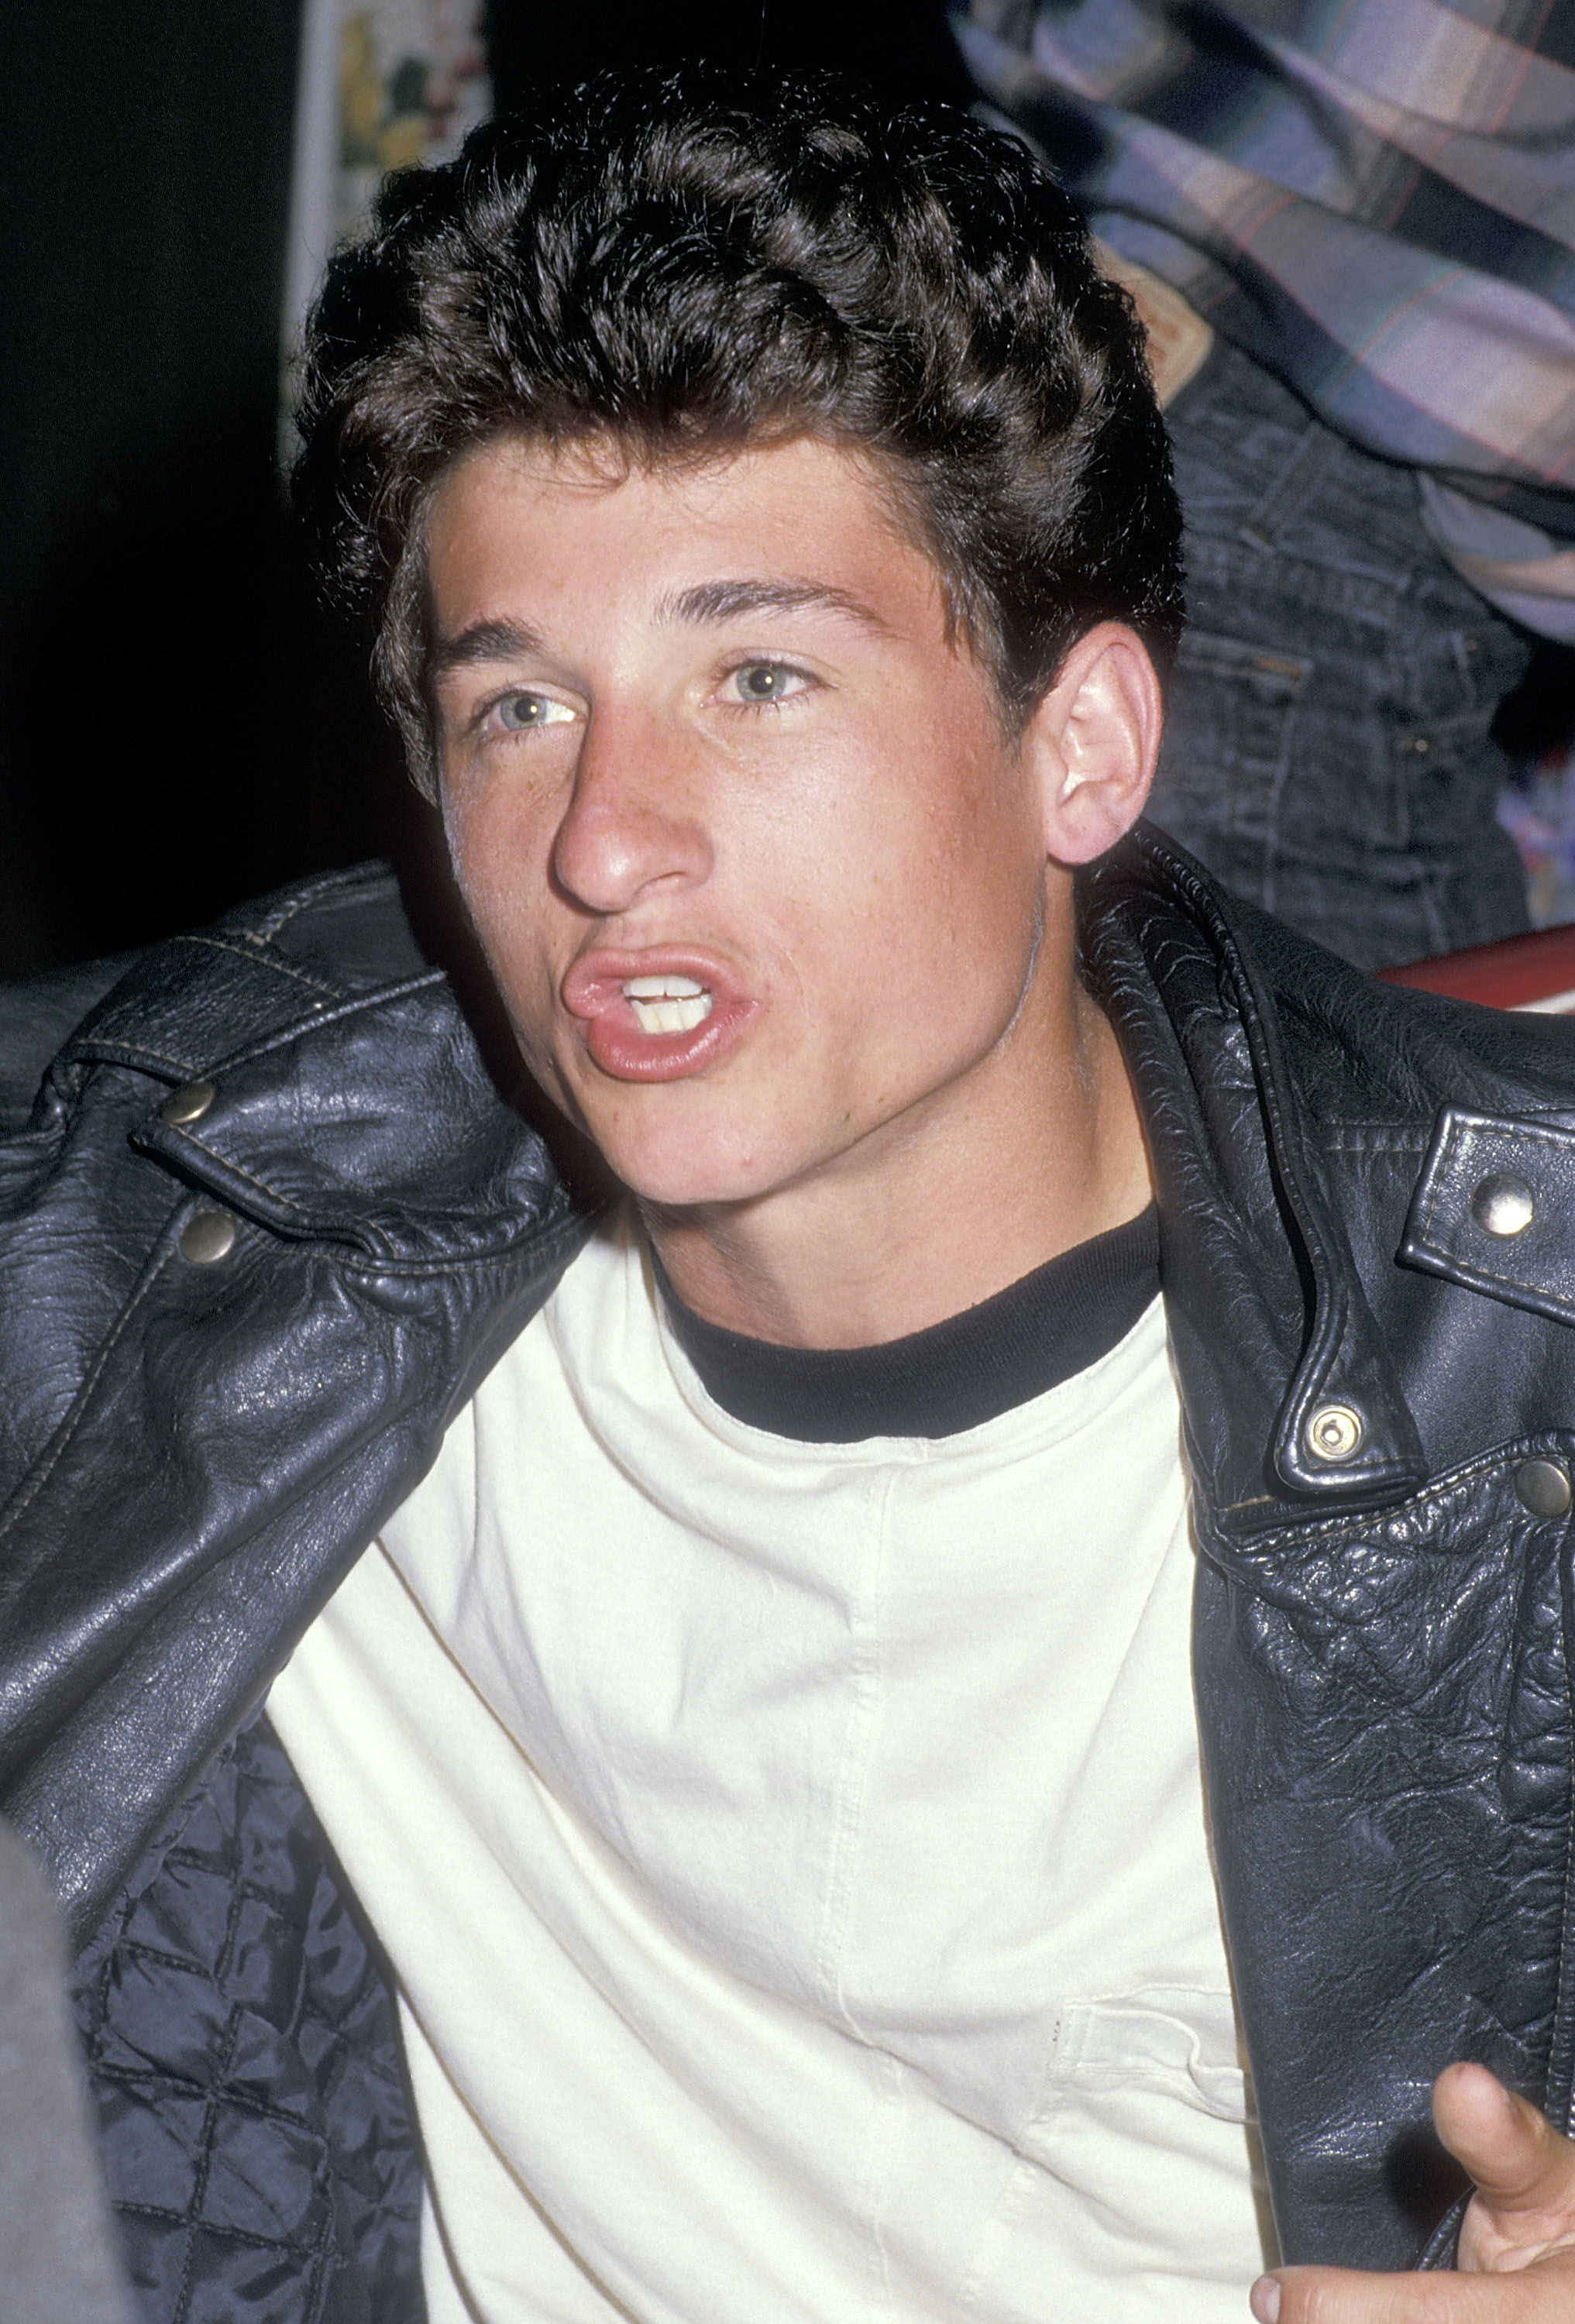 Patrick Dempsey attends the premiere of "Short Circuits 2" on July 5, 1988 in Beverly Hills, California | Source: Getty Images